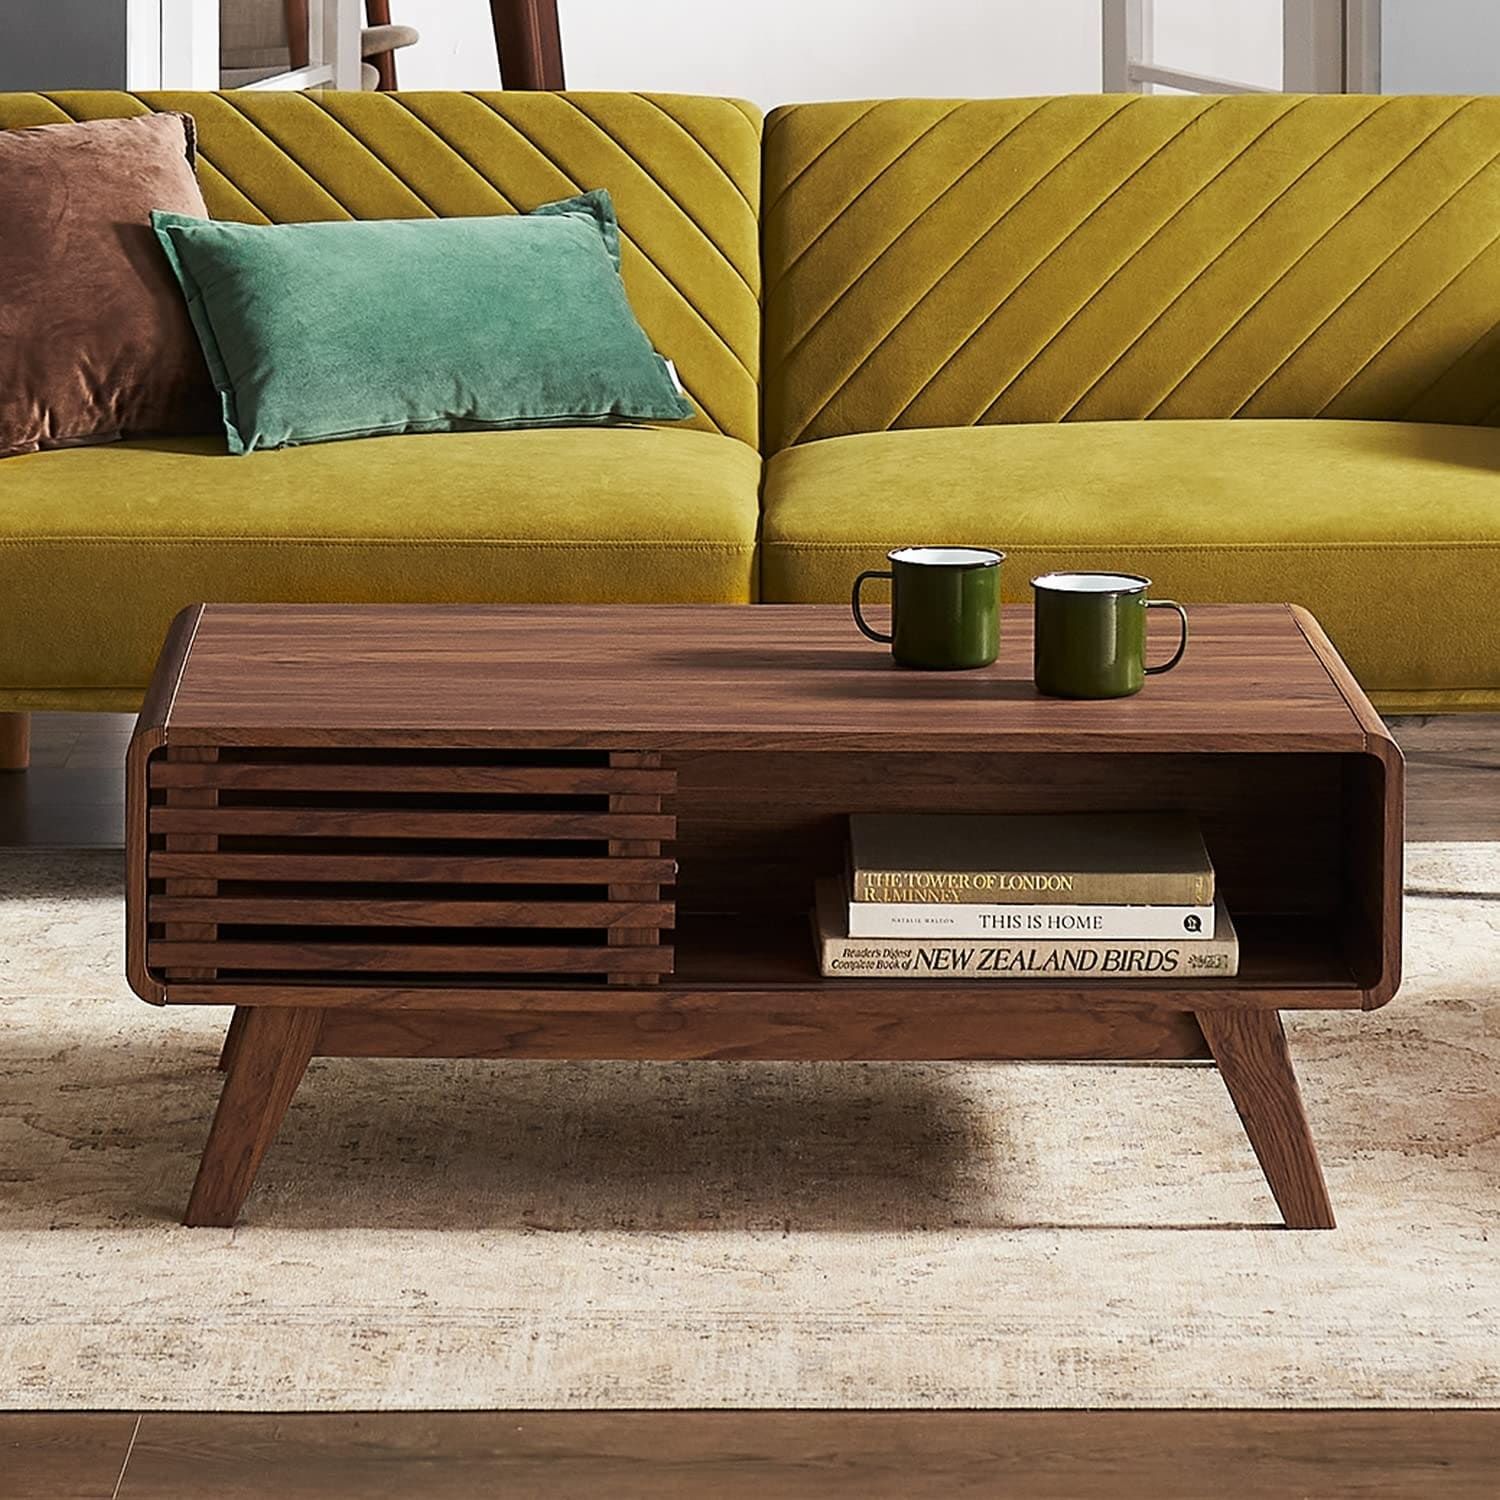 Mopio Ensley Mid Century Modern Coffee Table With Dual Side Storage,  Centerpiece For Your Living Room – On Sale – Bed Bath & Beyond – 35279177 With Mid Century Modern Coffee Tables (View 14 of 15)